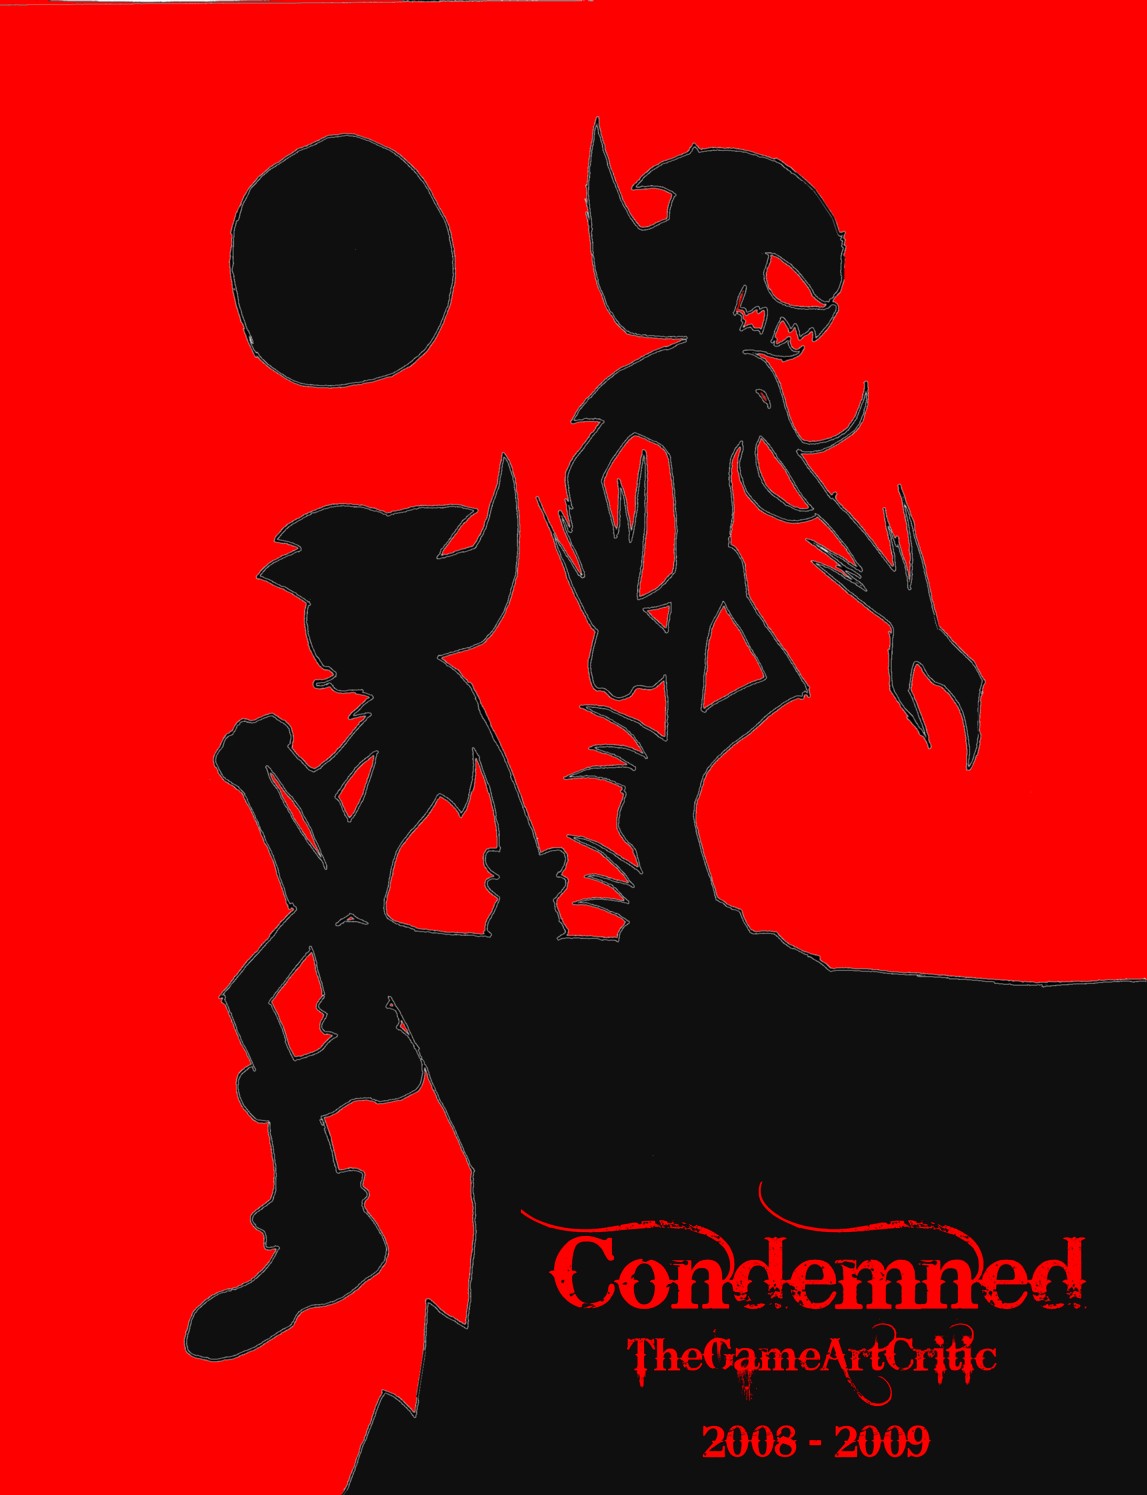 Condemned 2008 - 2009 Wallpaper by TheGameArtCritic